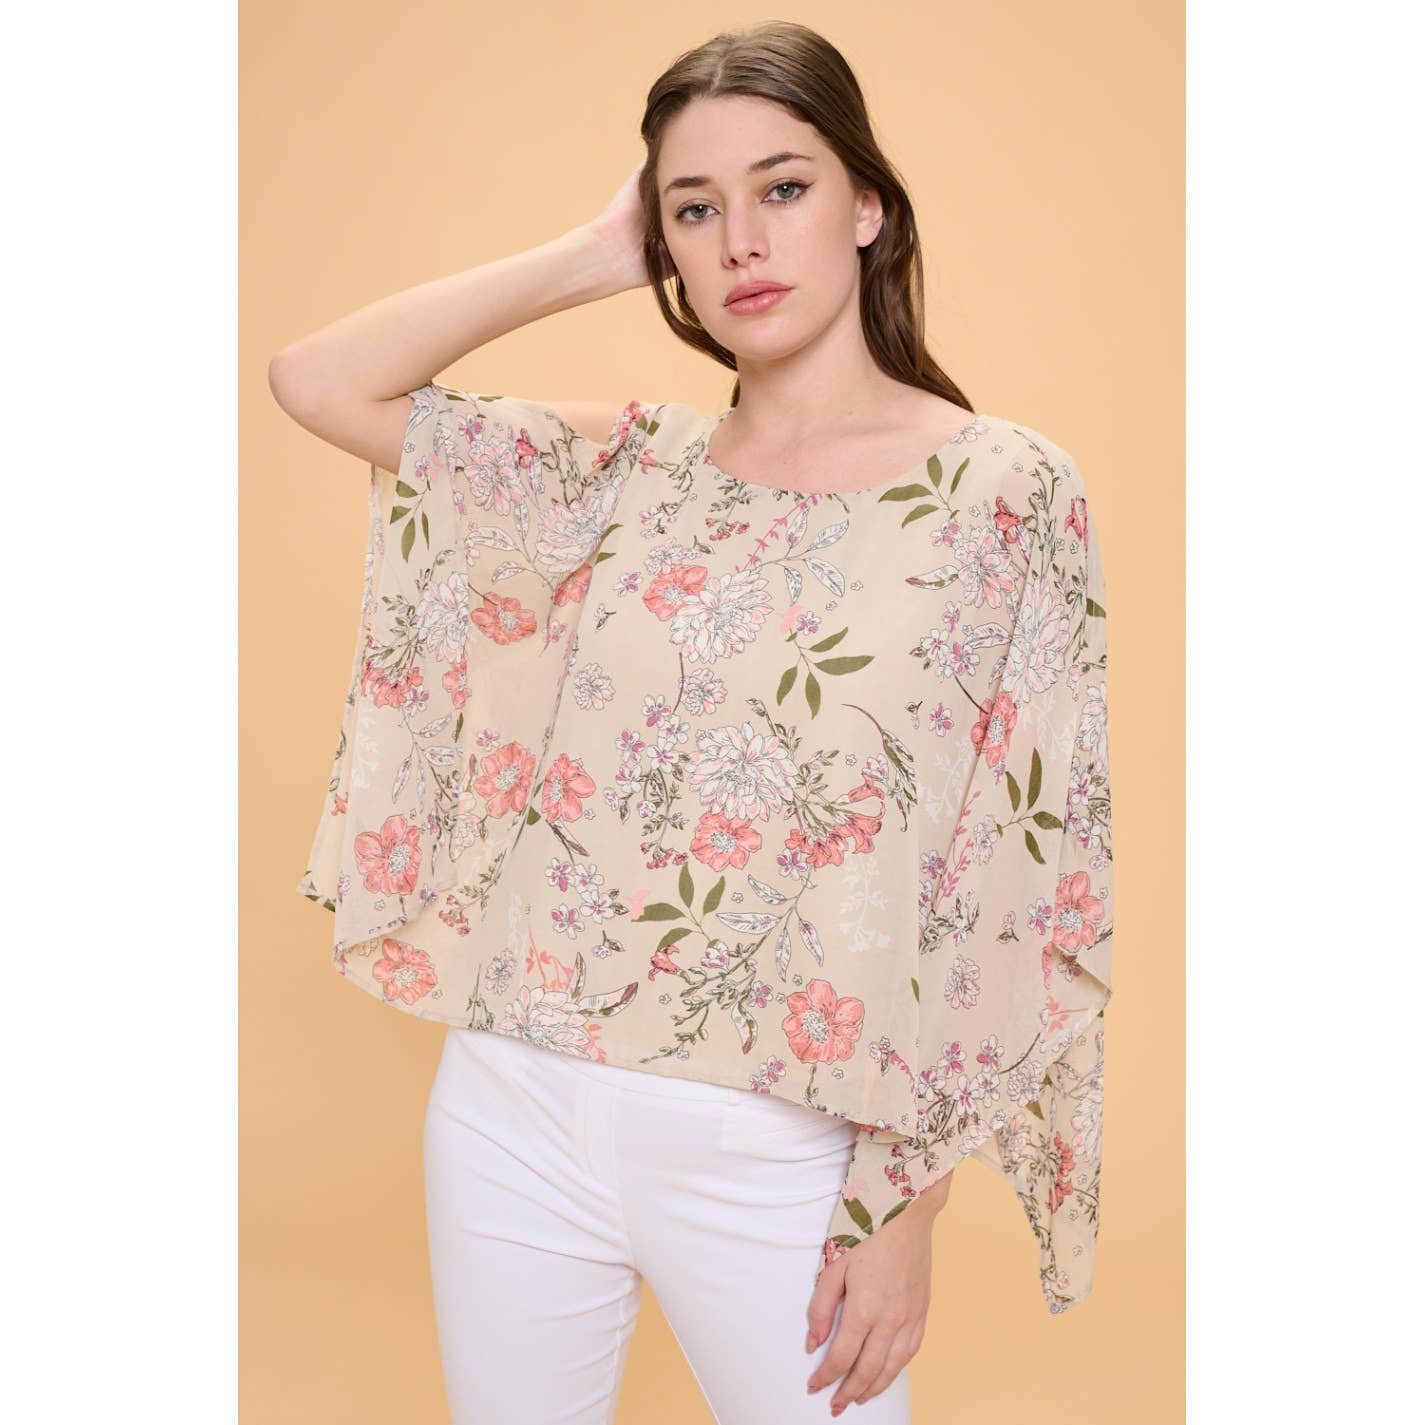 PS- Slit Angel Scoop Neck Overlay Blouse in Taupe/Mauve